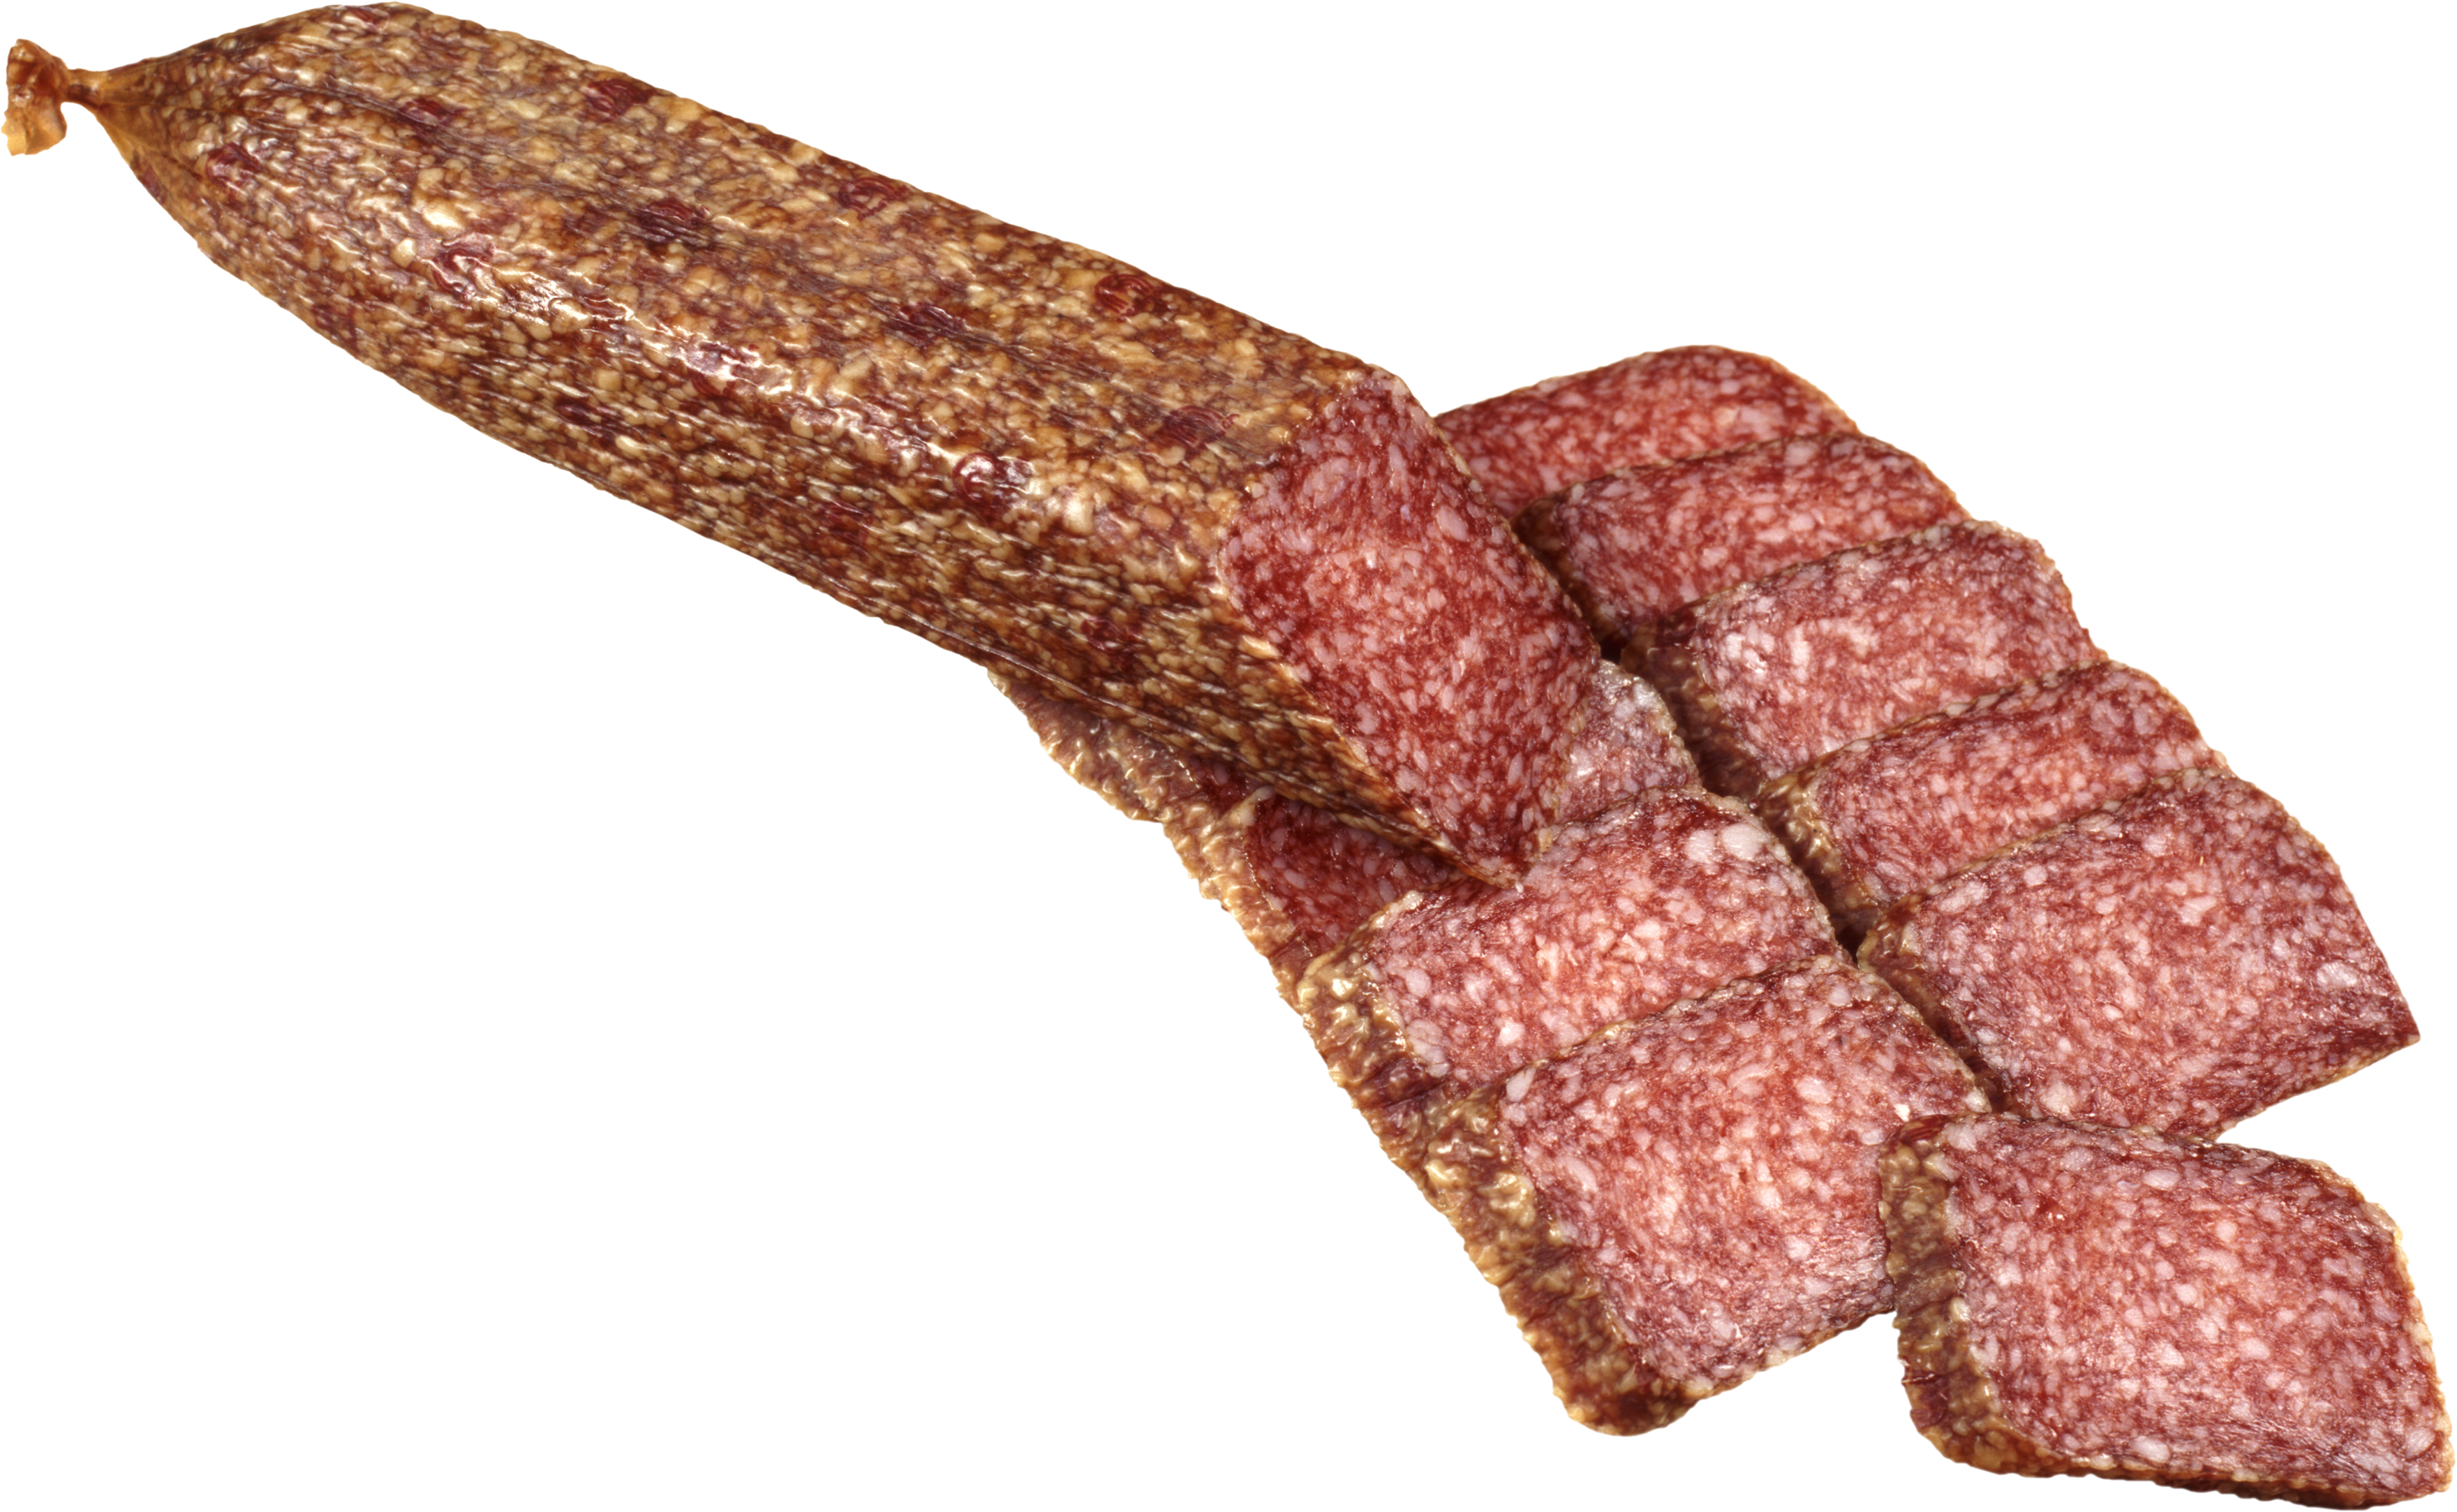 Sausage PNG images, free pictures sausage PNG download.